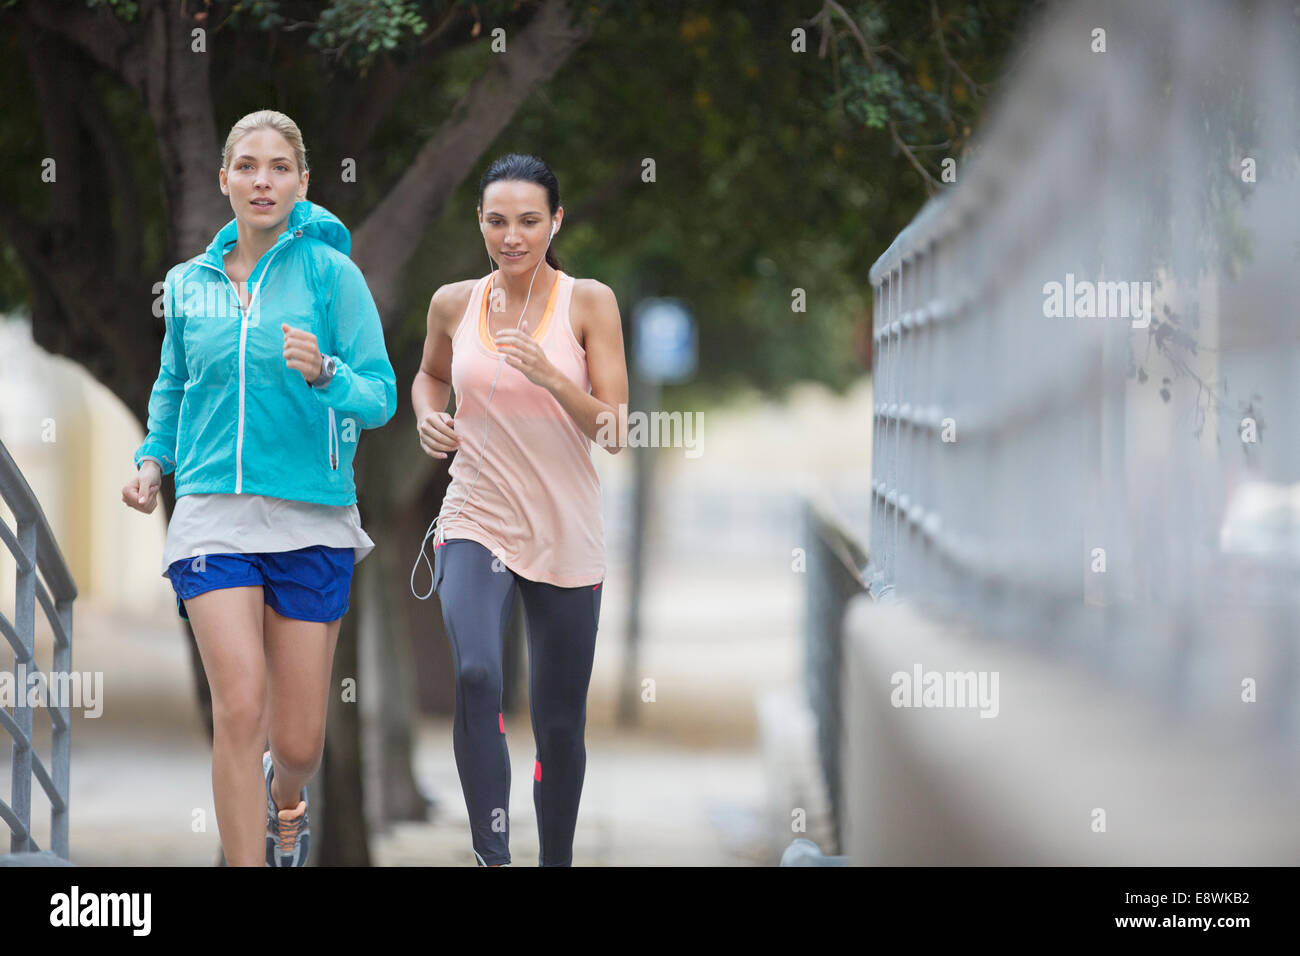 Two women jogging in park Stock Photo by ©nd3000 166658658